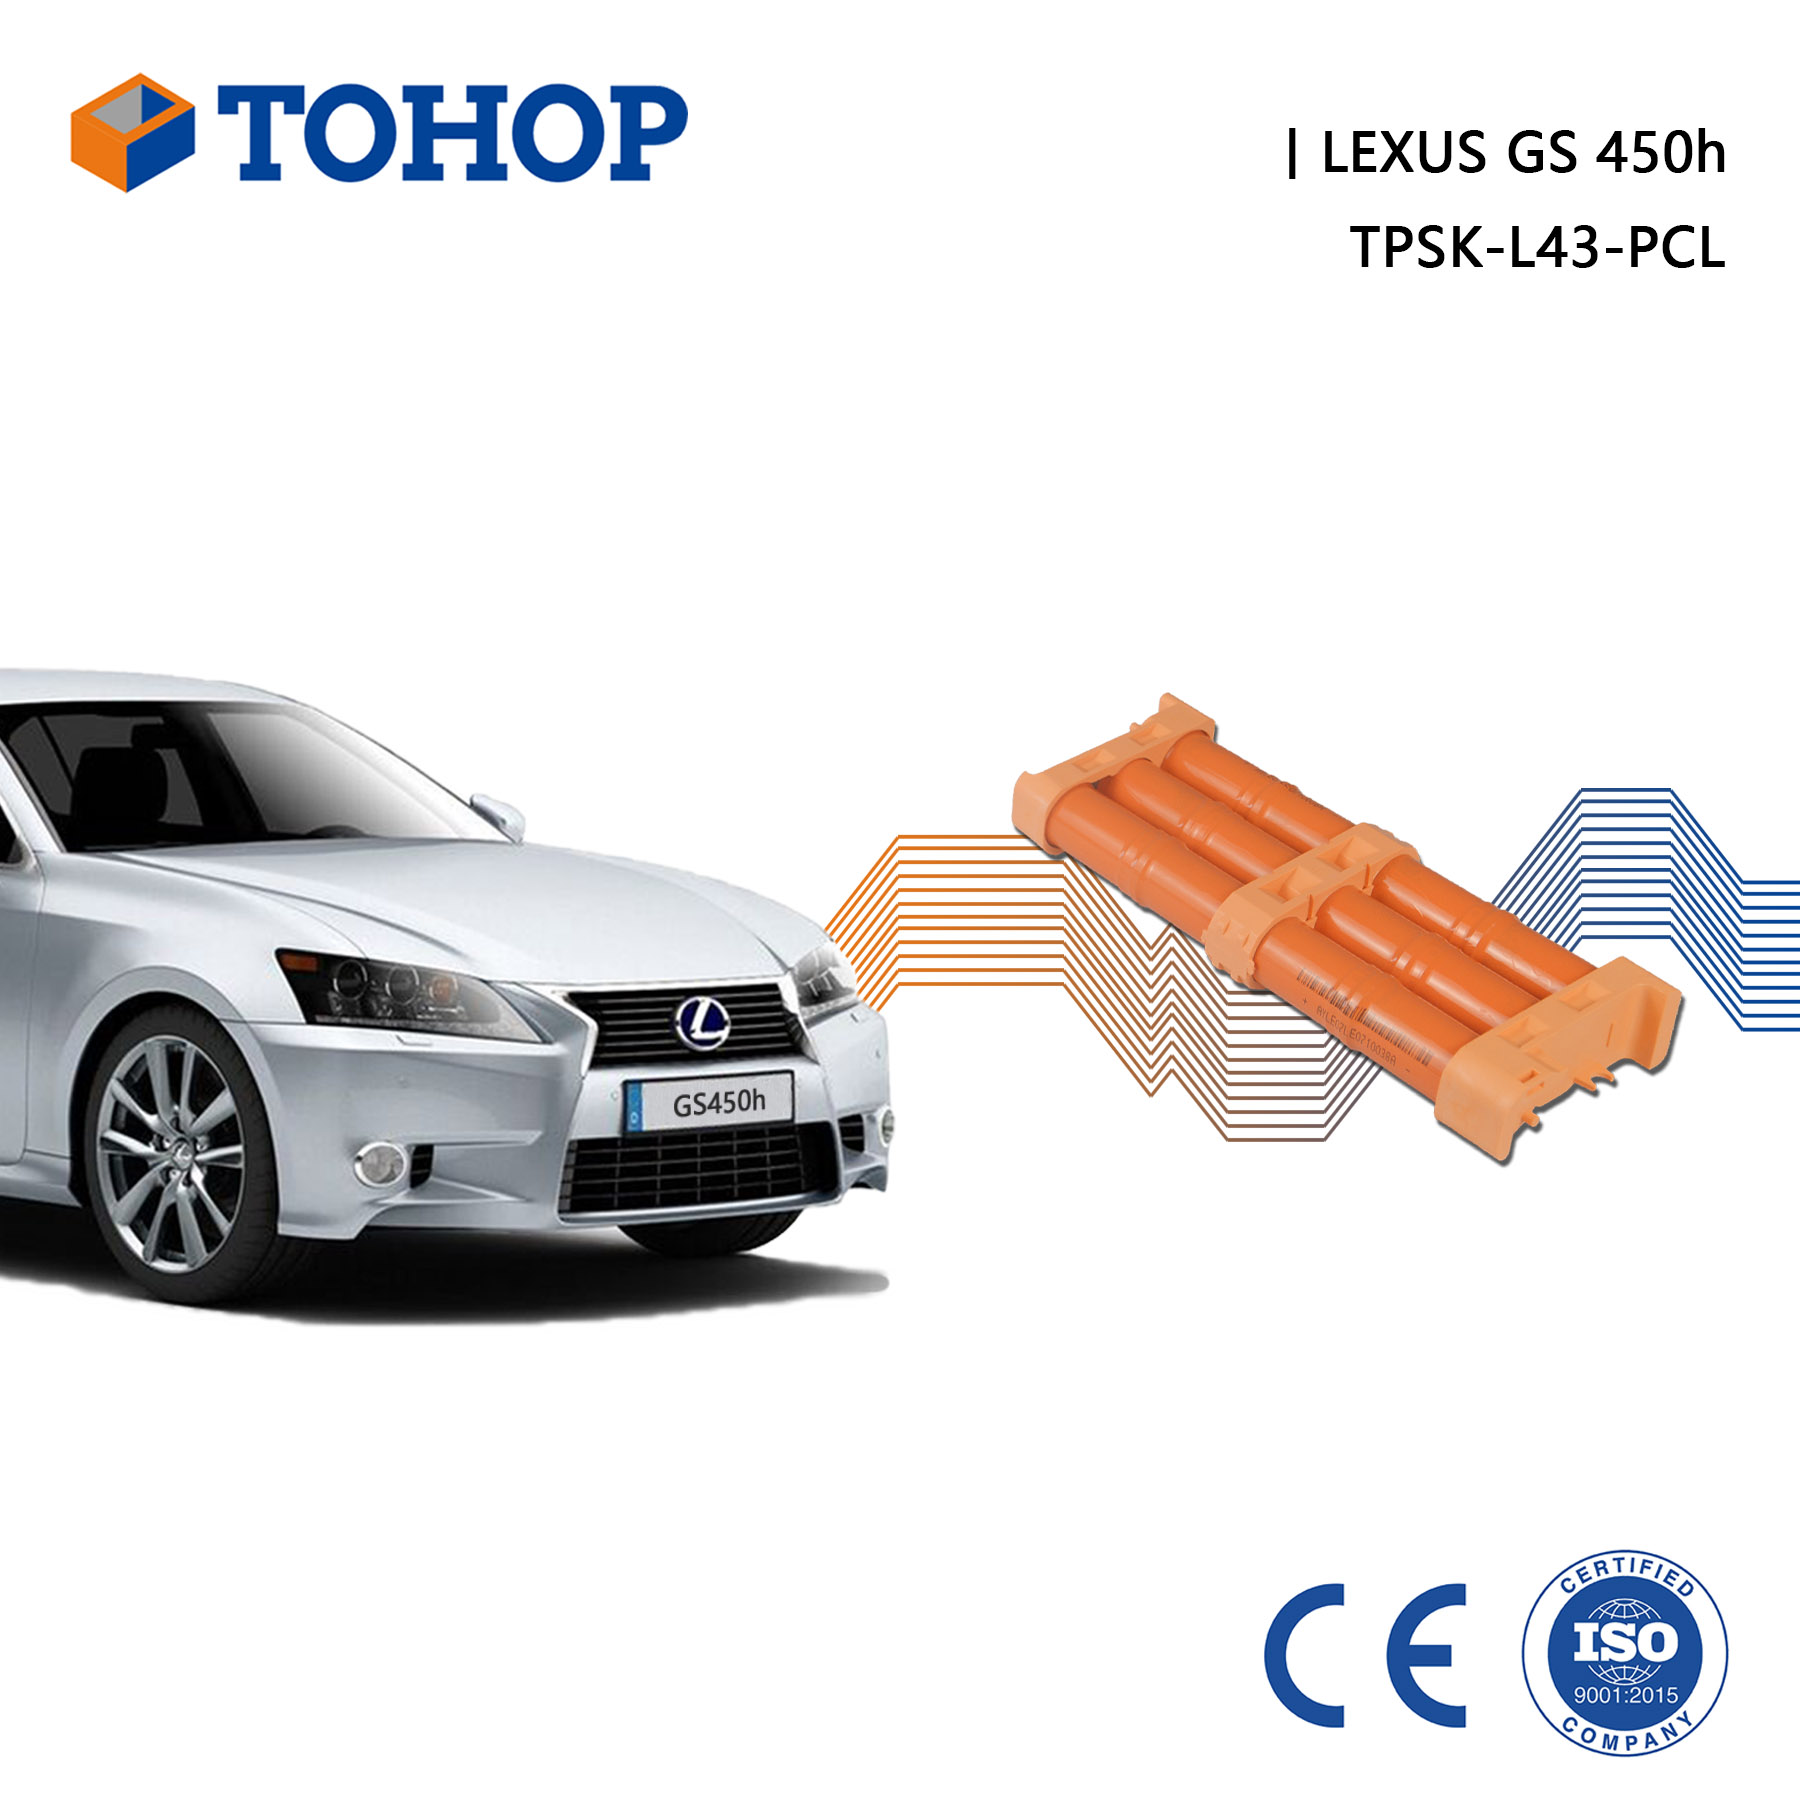 GS450h Thrid Gen. S190 Rechargeable Hybrid Car Battery Pack for Lexus